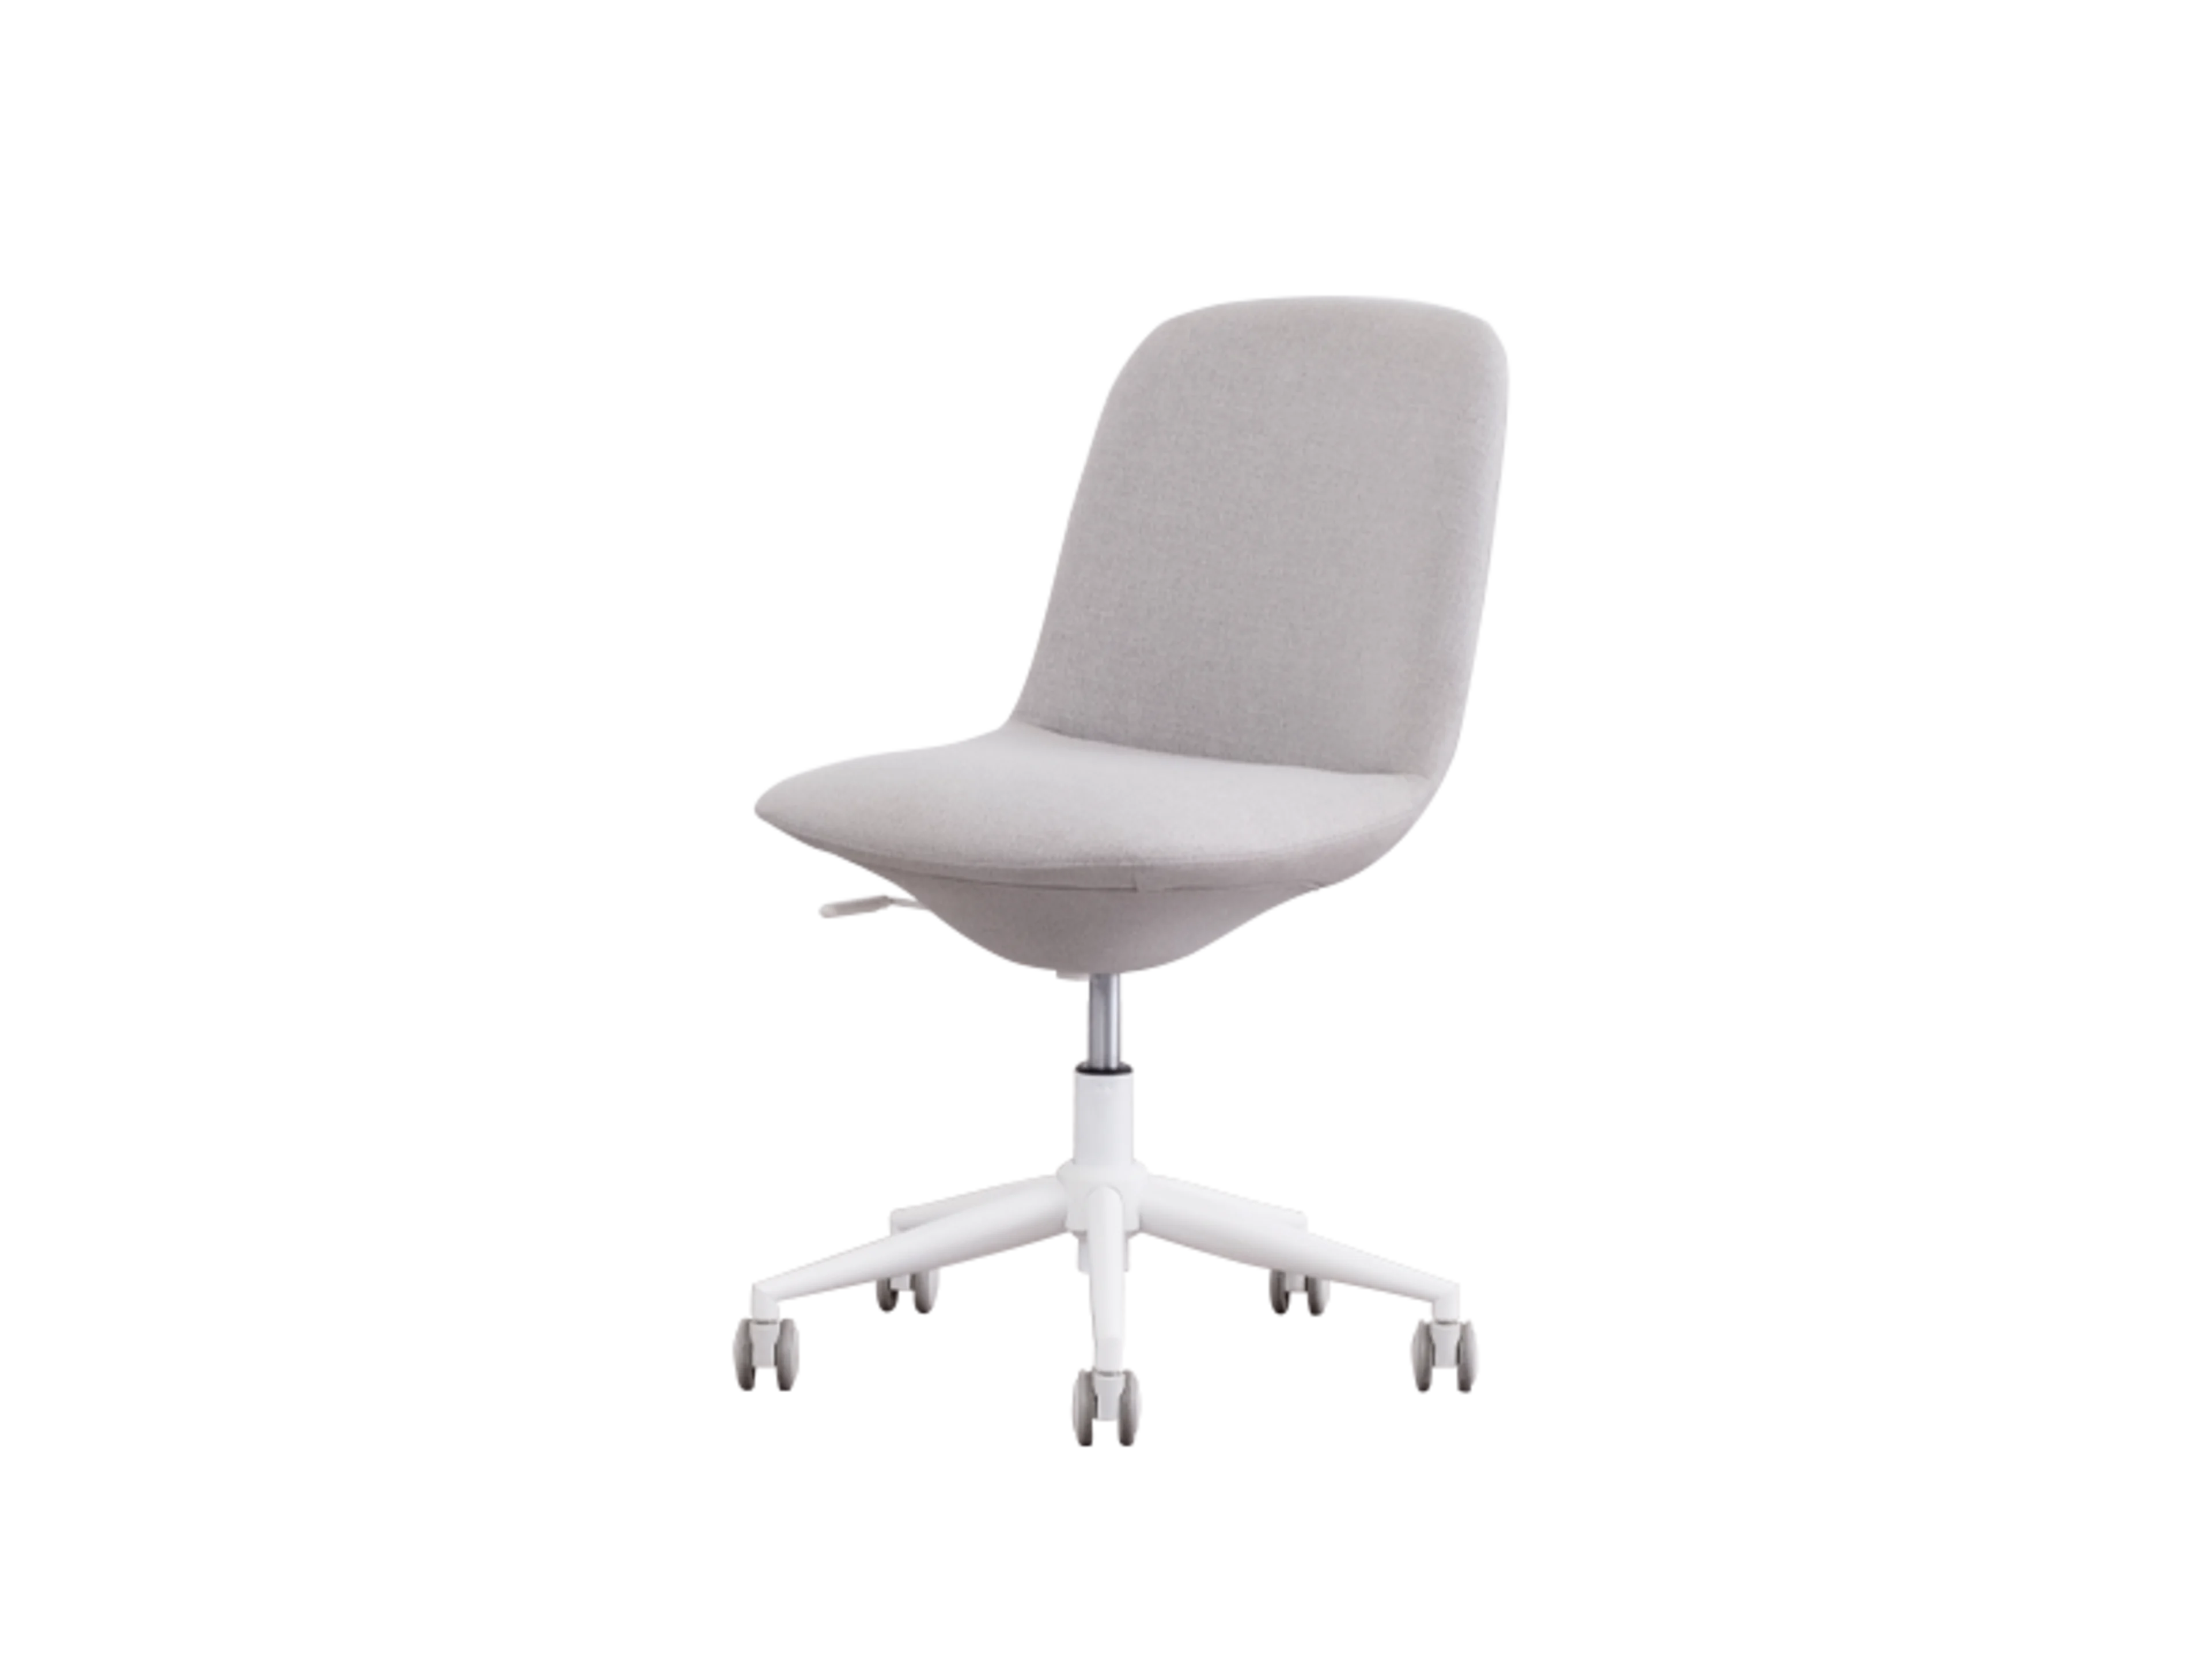 Upright Office Chair